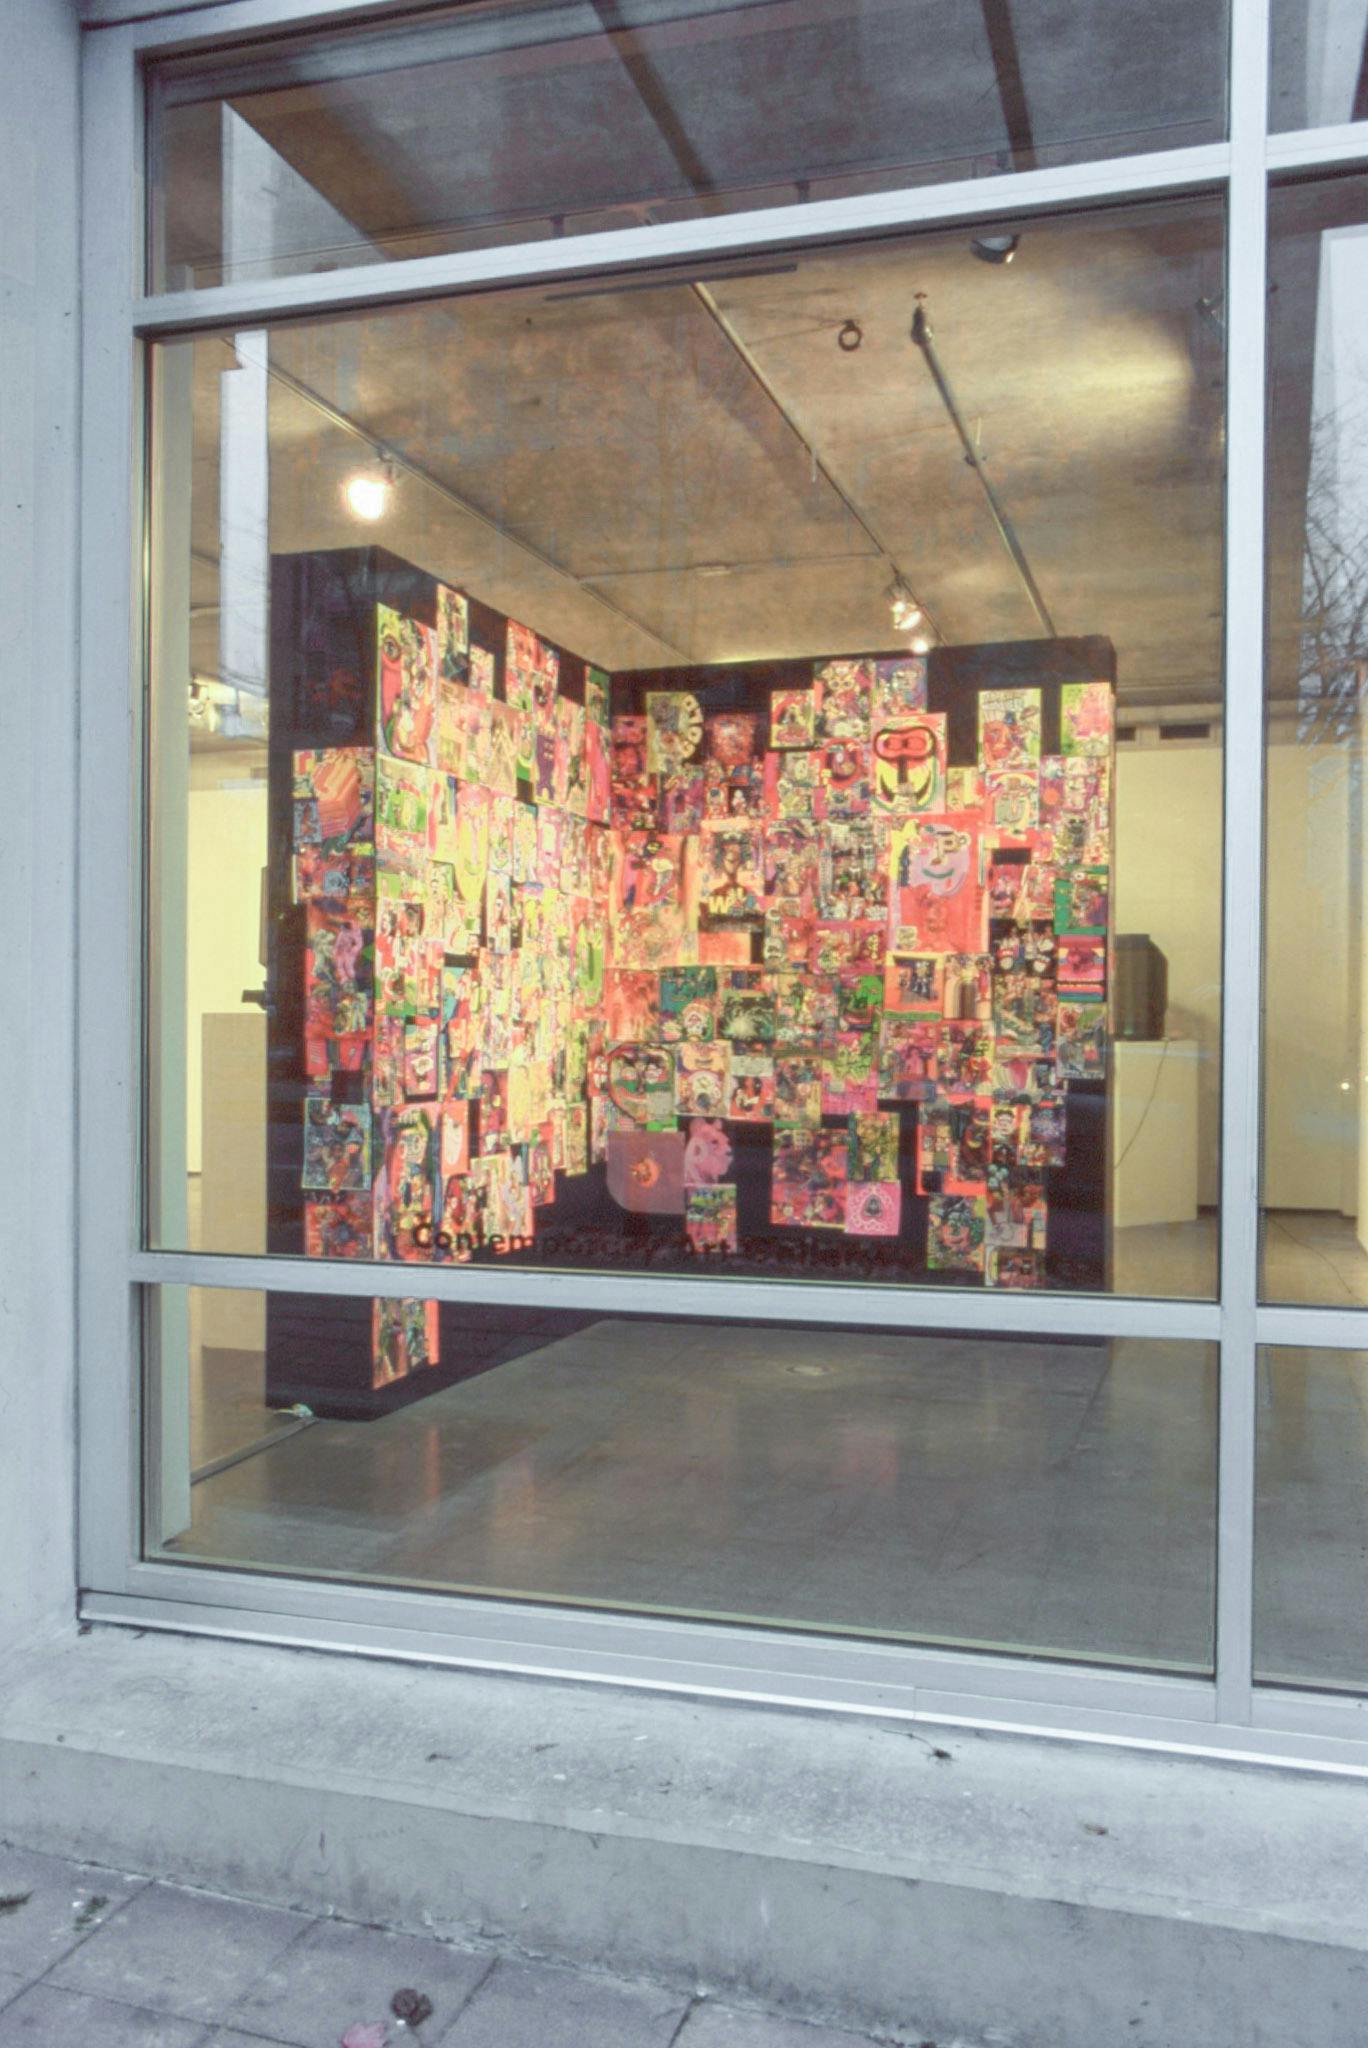 An installation image of artworks in a gallery taken from outside through the windows. A countless number of neon coloured two-dimensional works, mostly drawings and collage pieces, cover two black separation walls.